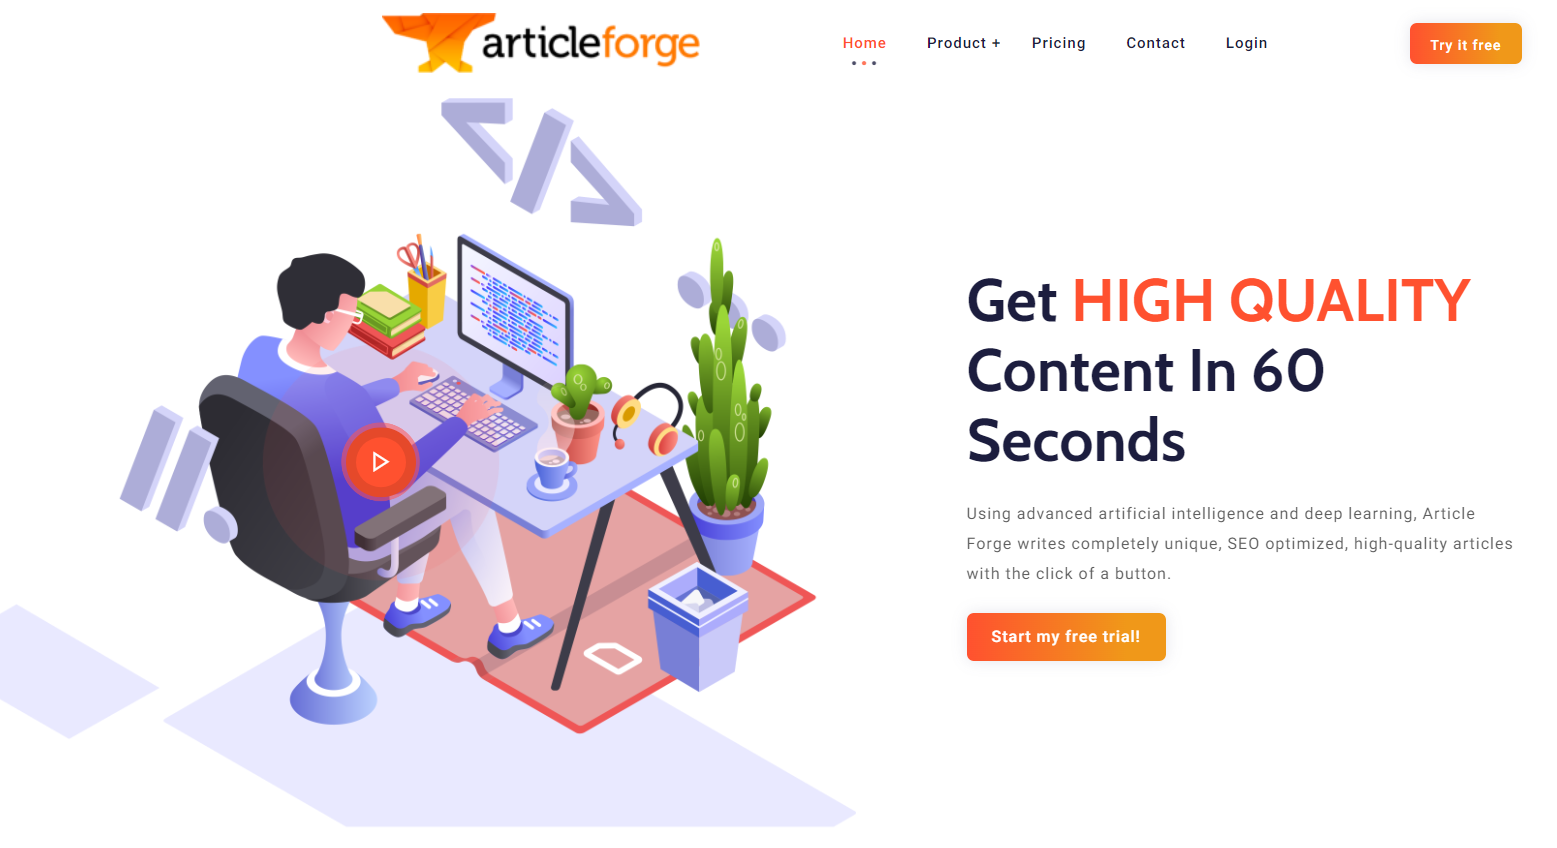 Article Forge Overview